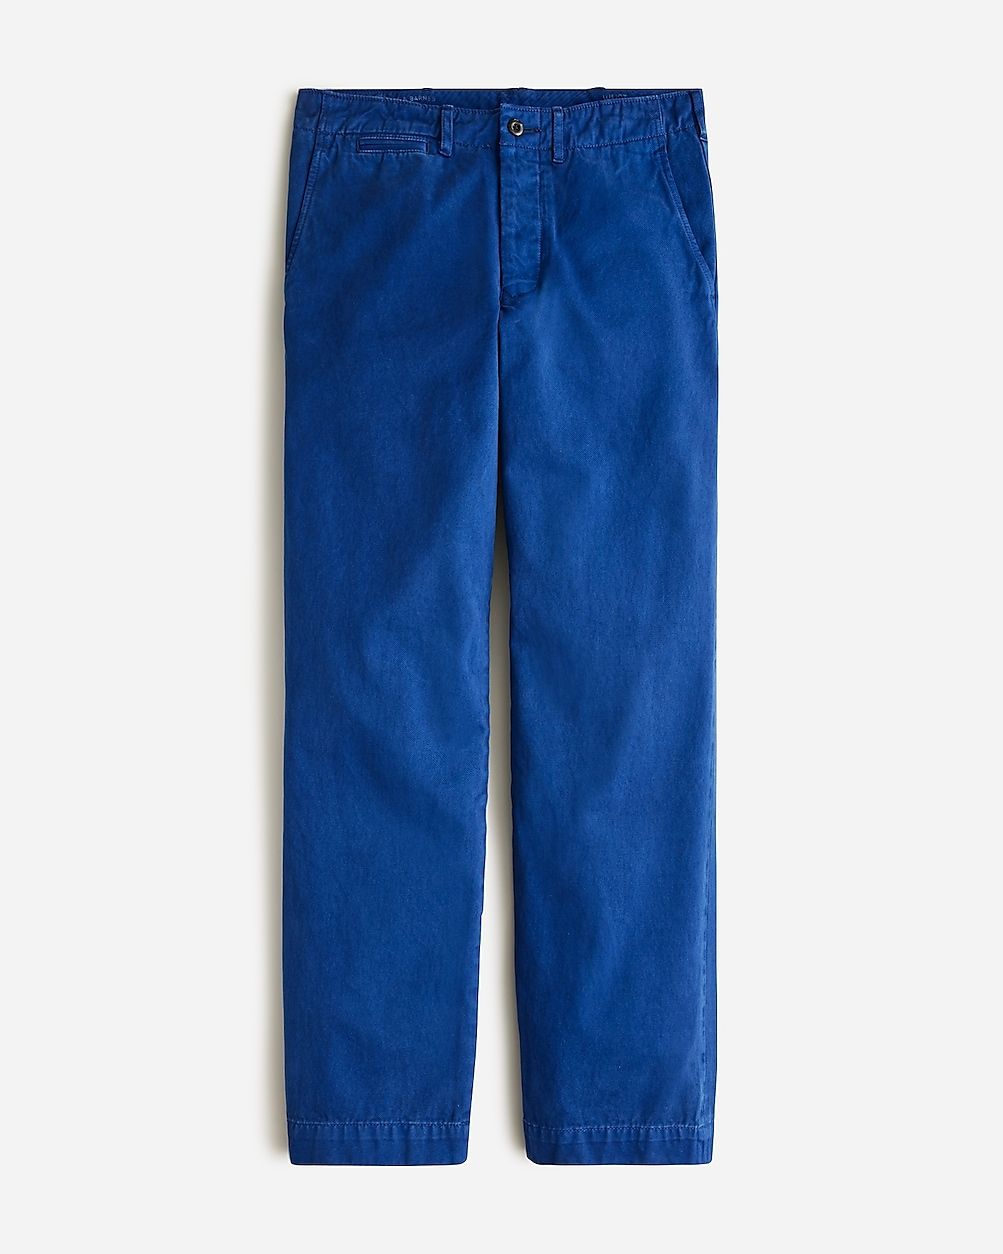 Wallace & Barnes selvedge officer chino pant | J.Crew US